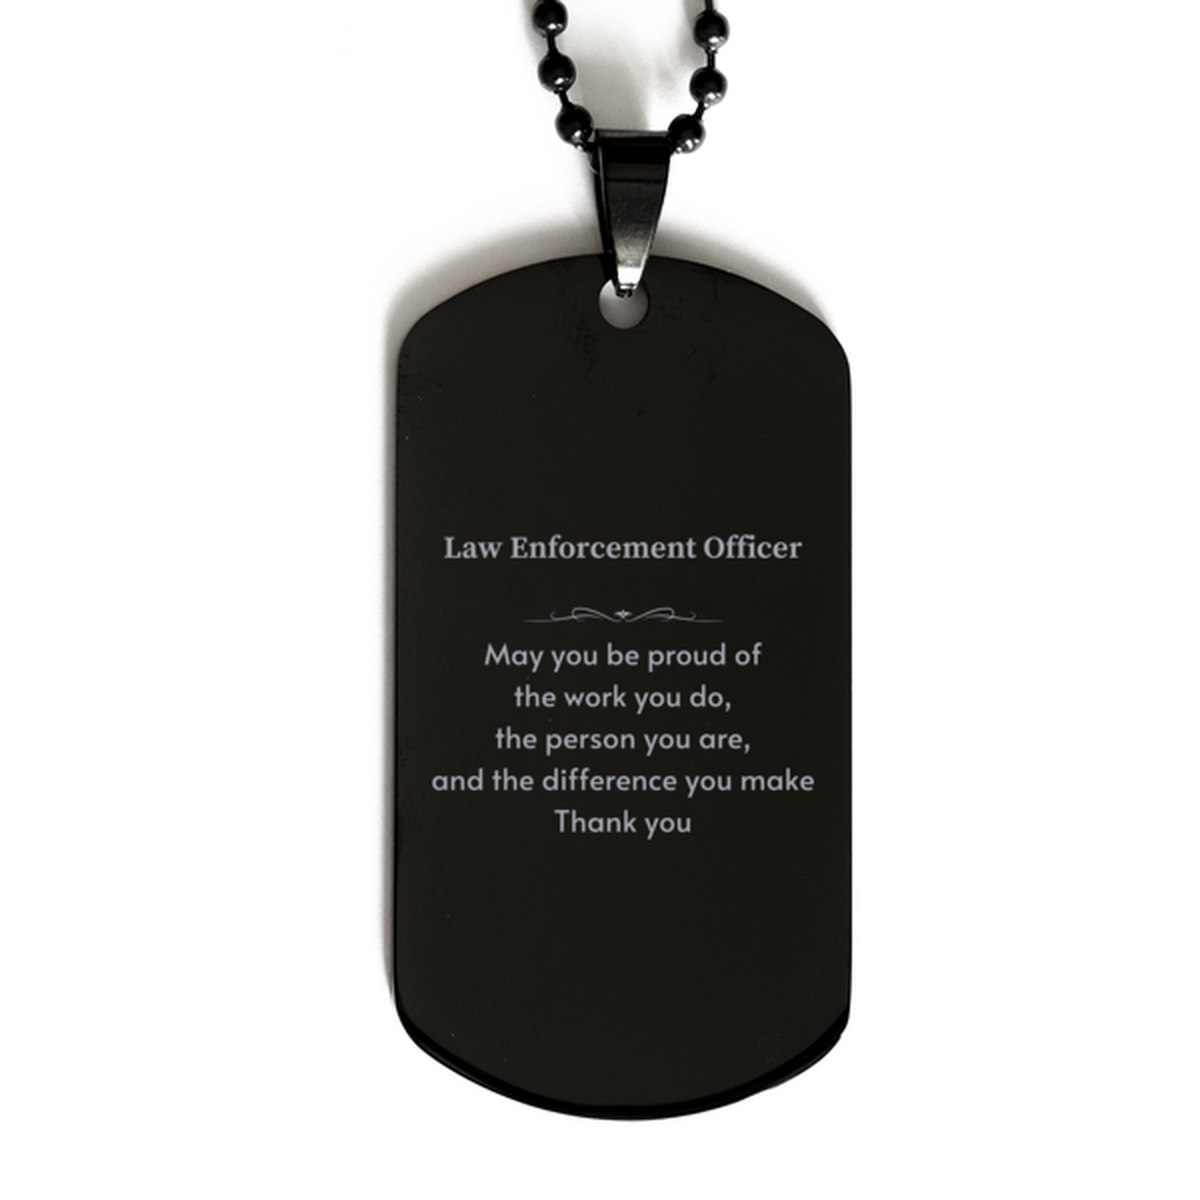 Heartwarming Black Dog Tag Retirement Coworkers Gifts for Law Enforcement Officer, Law Enforcement Officer May You be proud of the work you do, the person you are Gifts for Boss Men Women Friends